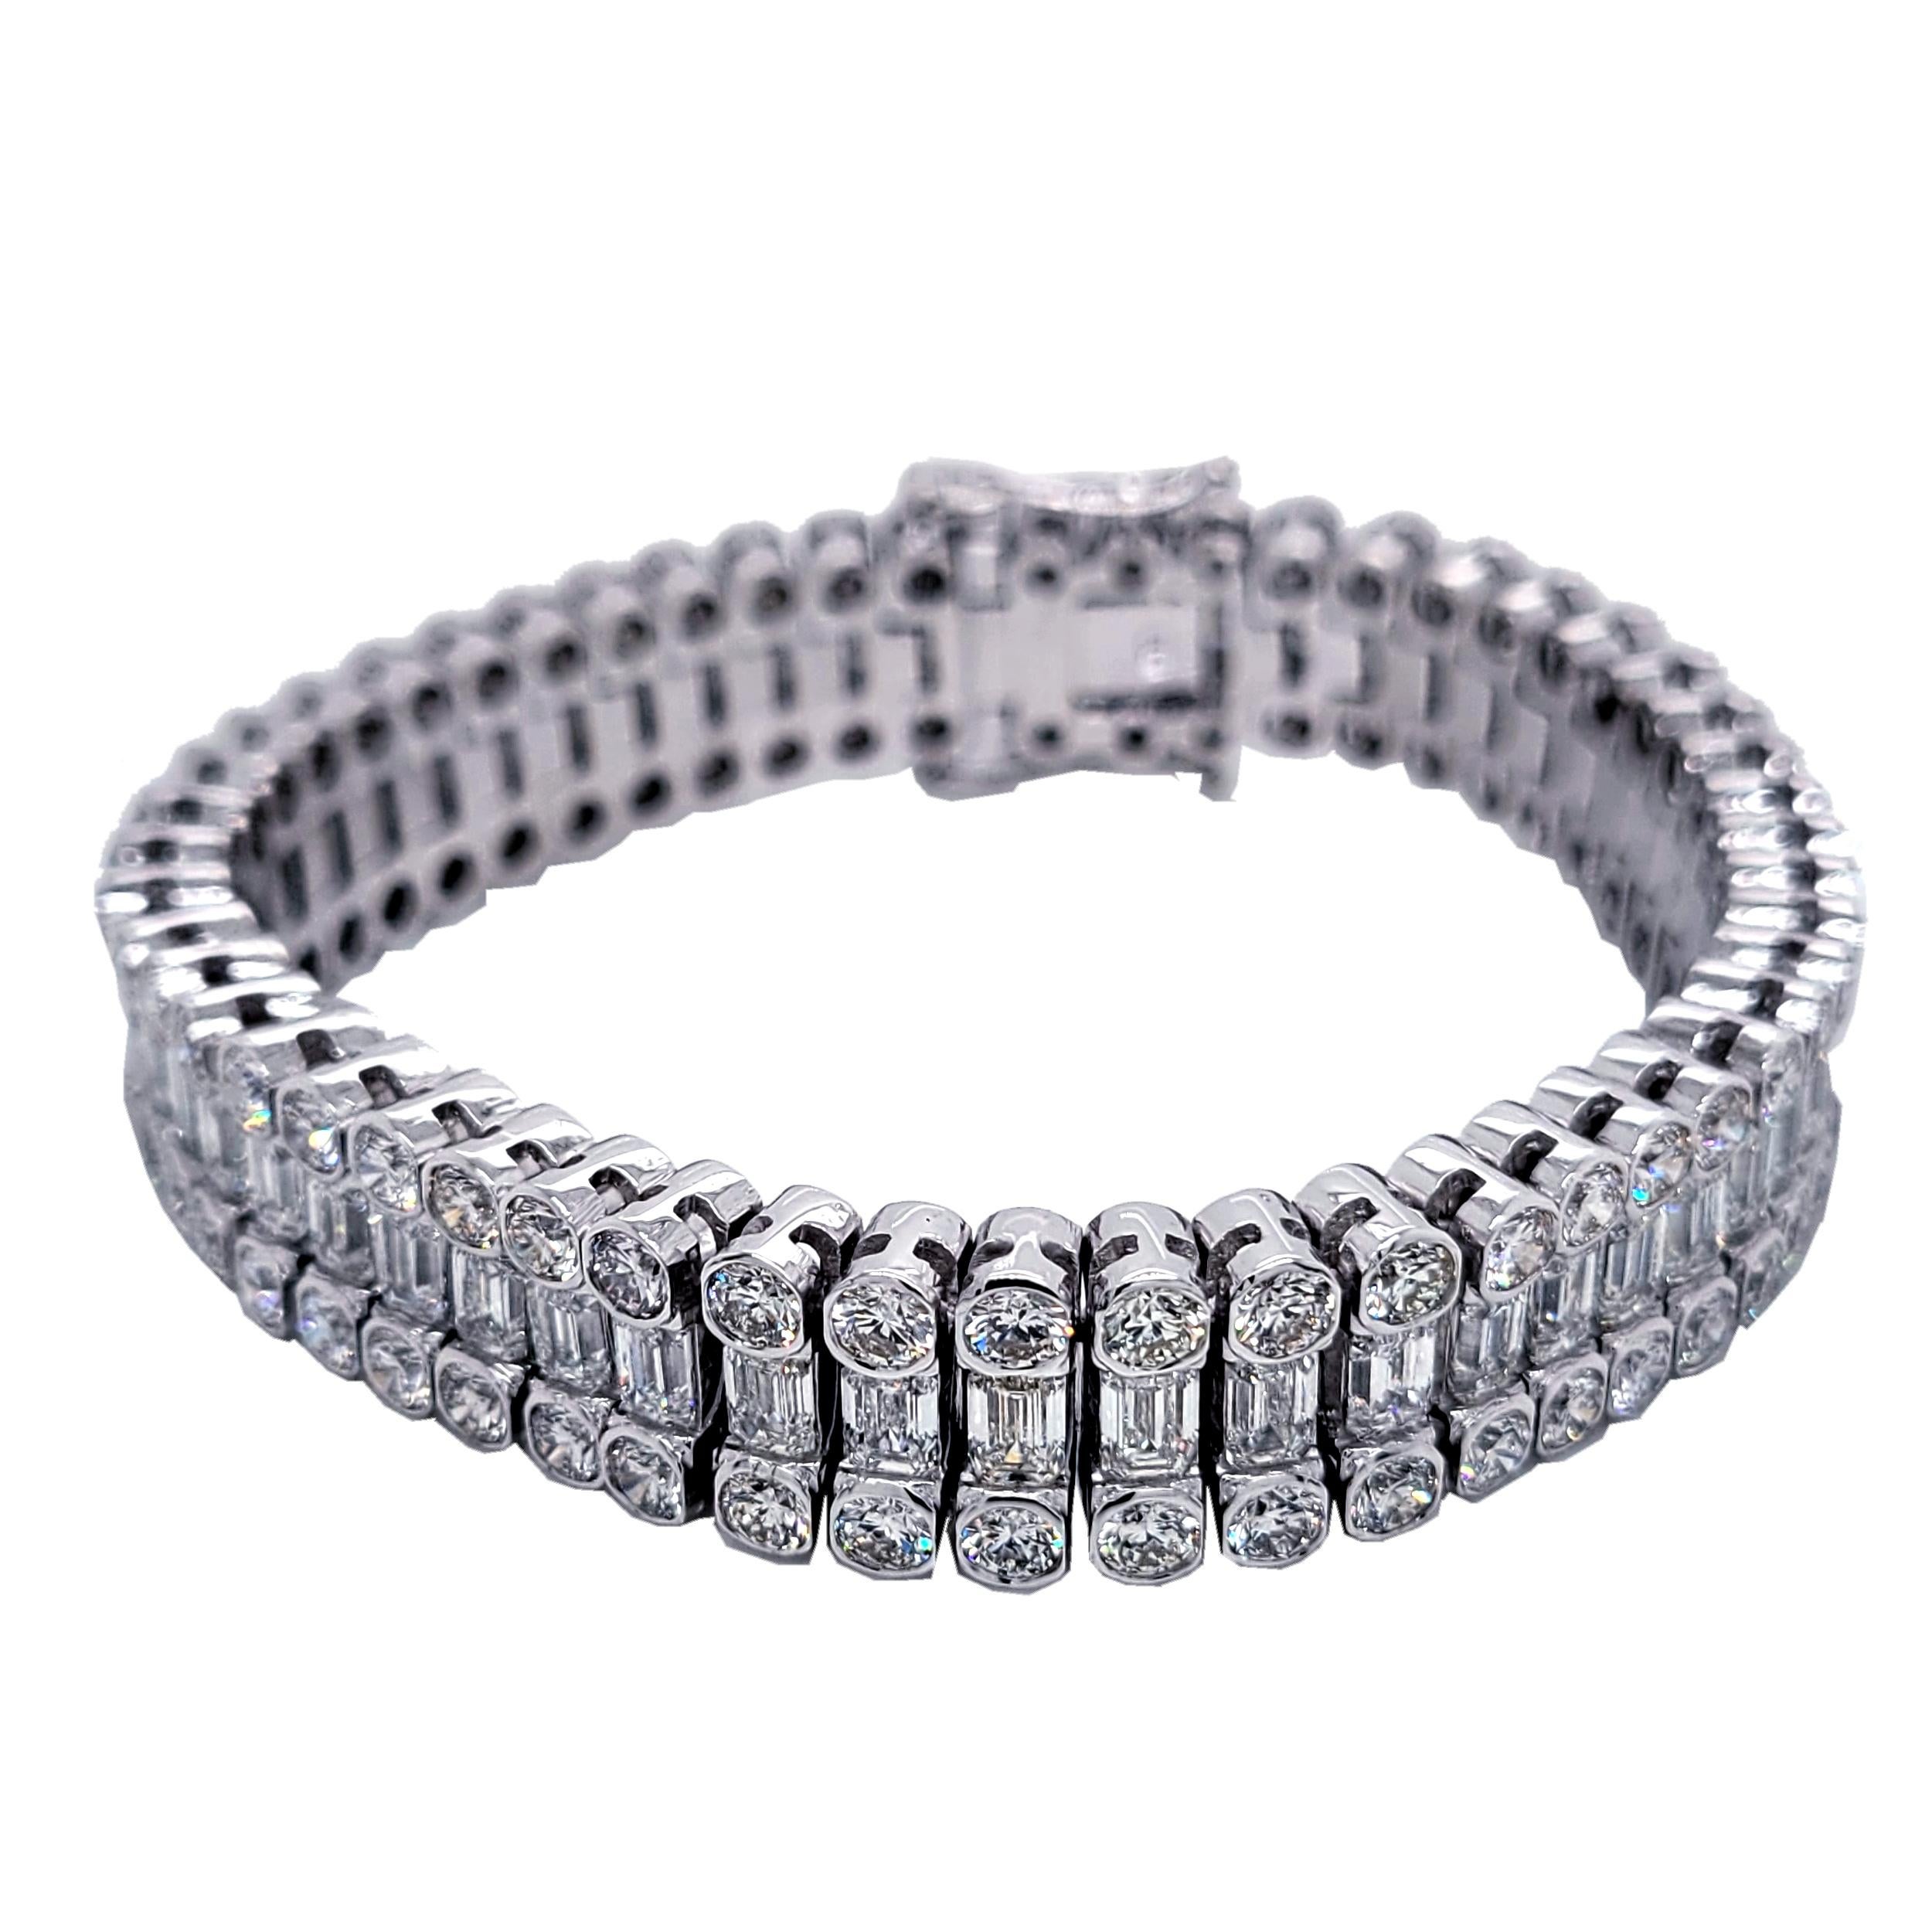 This elegant Diamond Tennis Bracelet consists of 51 Links of Round Brilliant/ Emerald Cut diamonds set in 18K White Gold. It is 7 inch long and about 1/2 inch wide.  This bracelet is made by the highest quality craftsmanship making it extremely